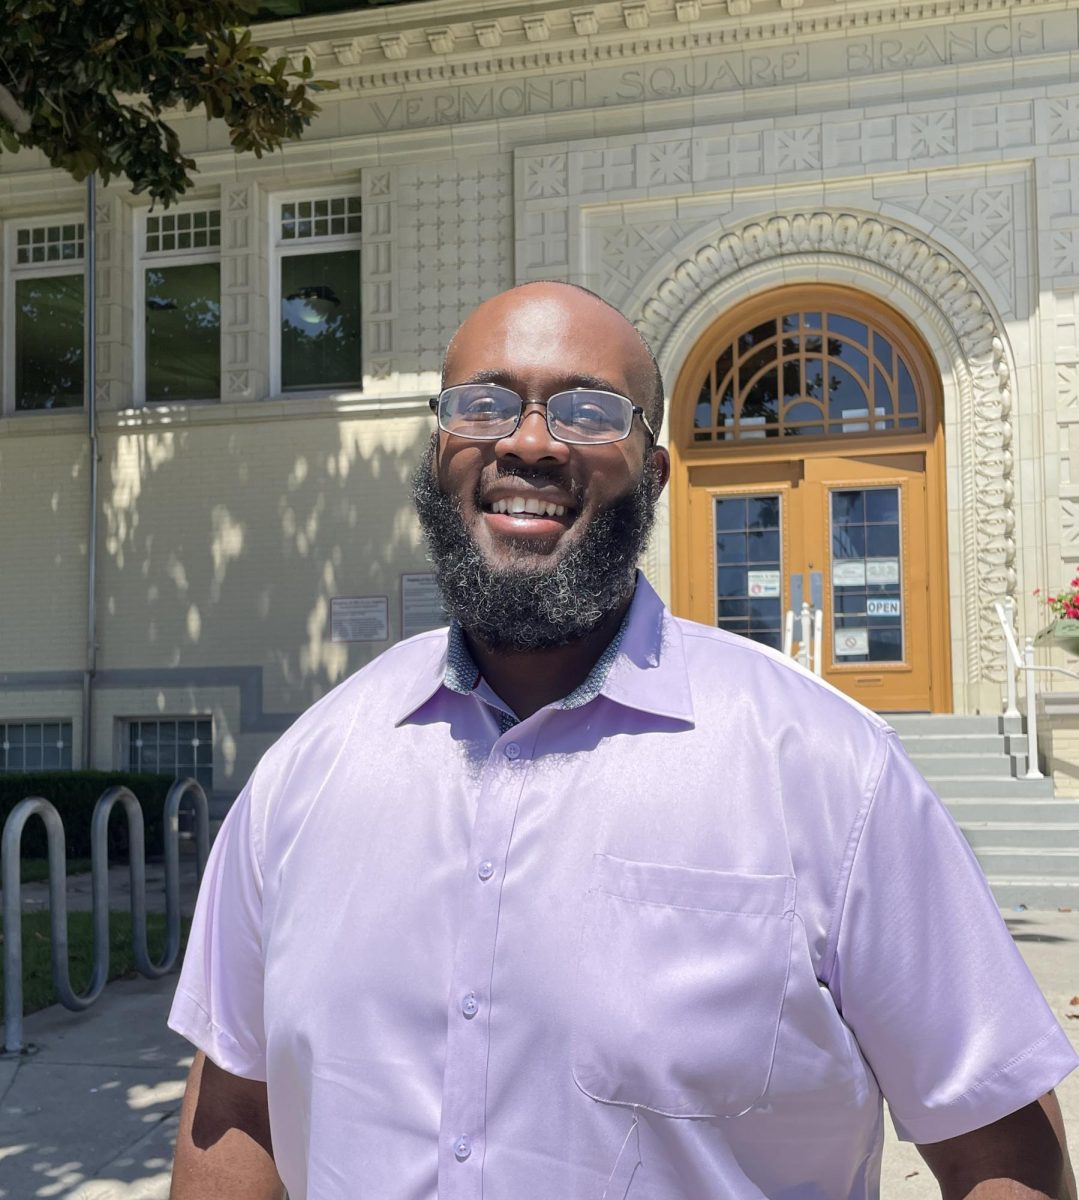 Matthew N. Crawford stands in front of the Vermont Square Public Library in Los Angeles, Calif. 